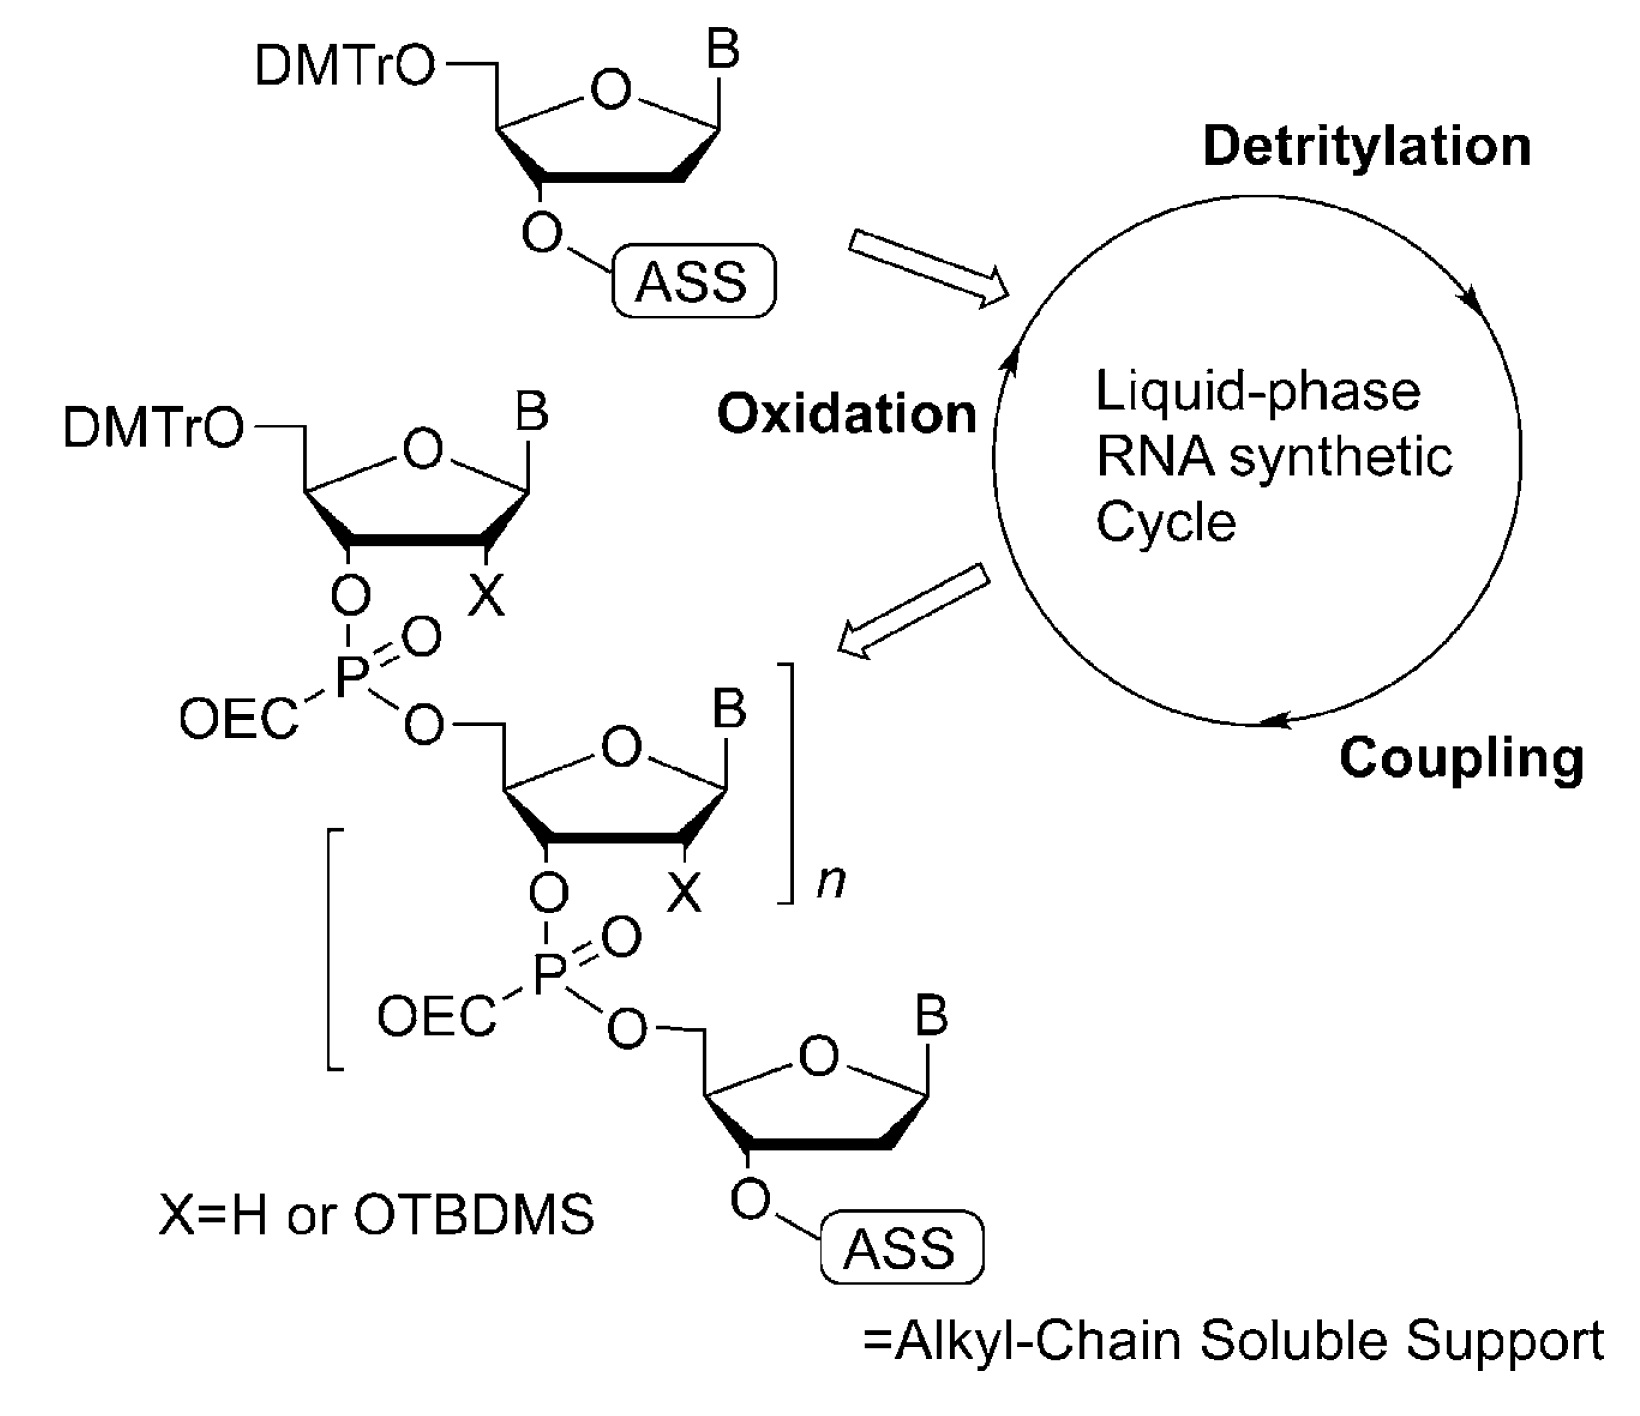 Liquid-Phase RNA Synthesis by Using
                      Alkyl-Chain-Soluble Support